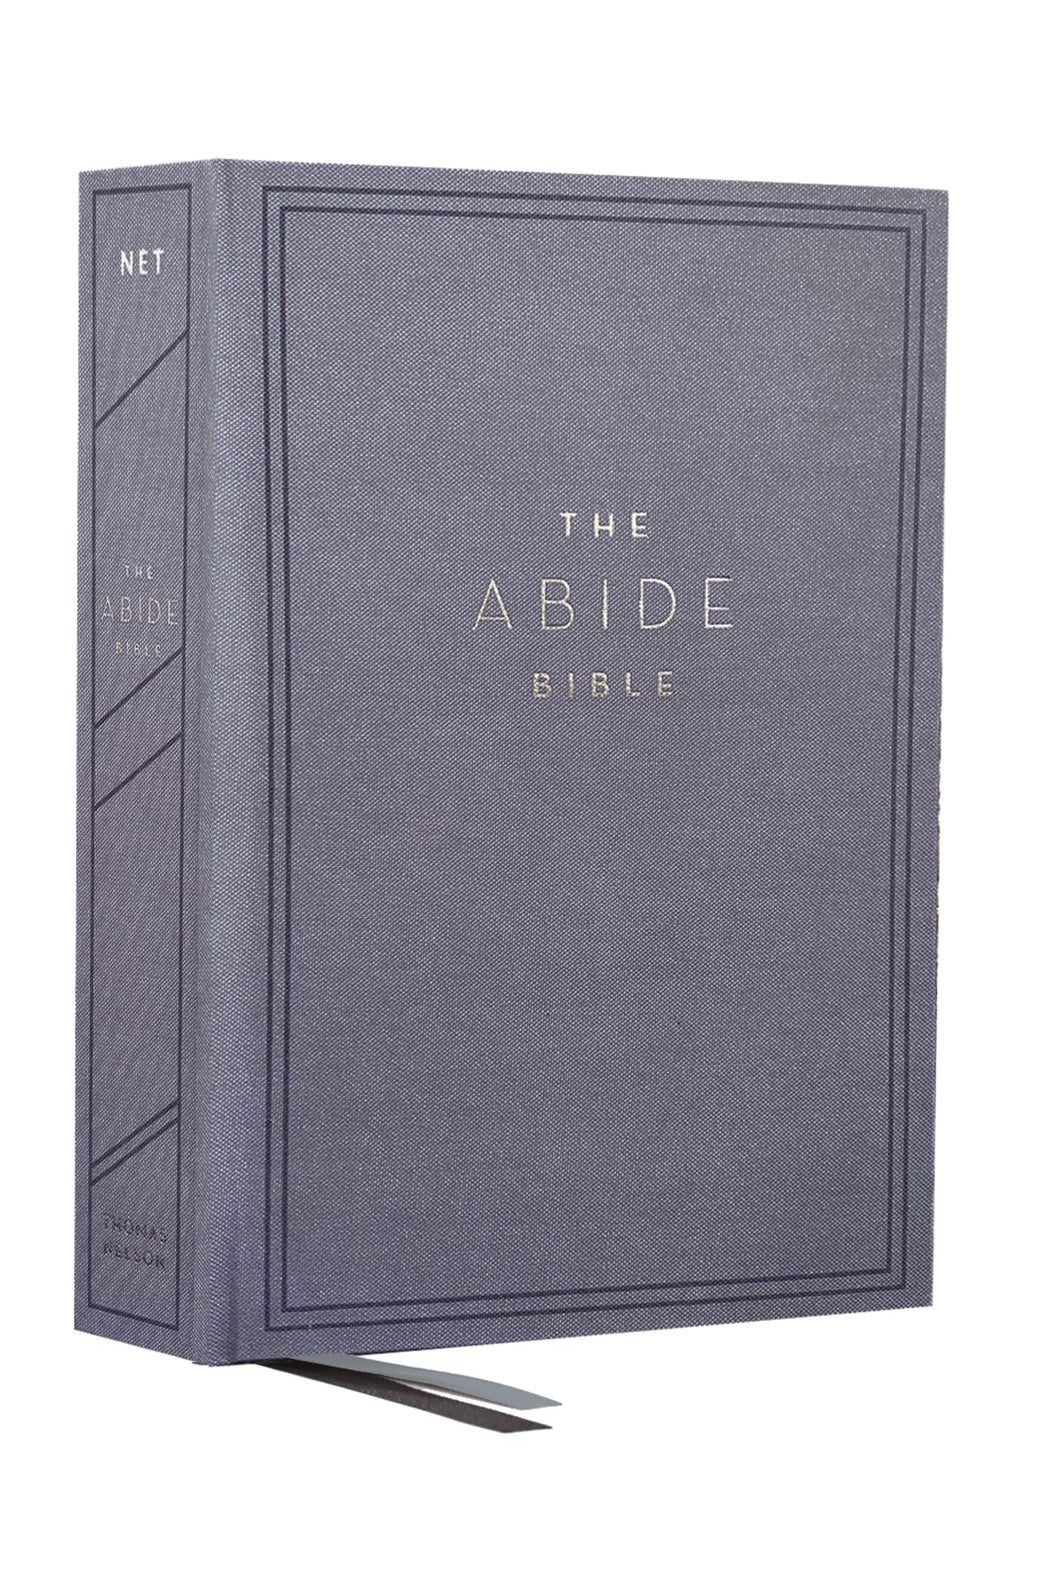 NET, Abide Bible, Cloth over Board, Blue, Comfort Print: Holy Bible Hardcover